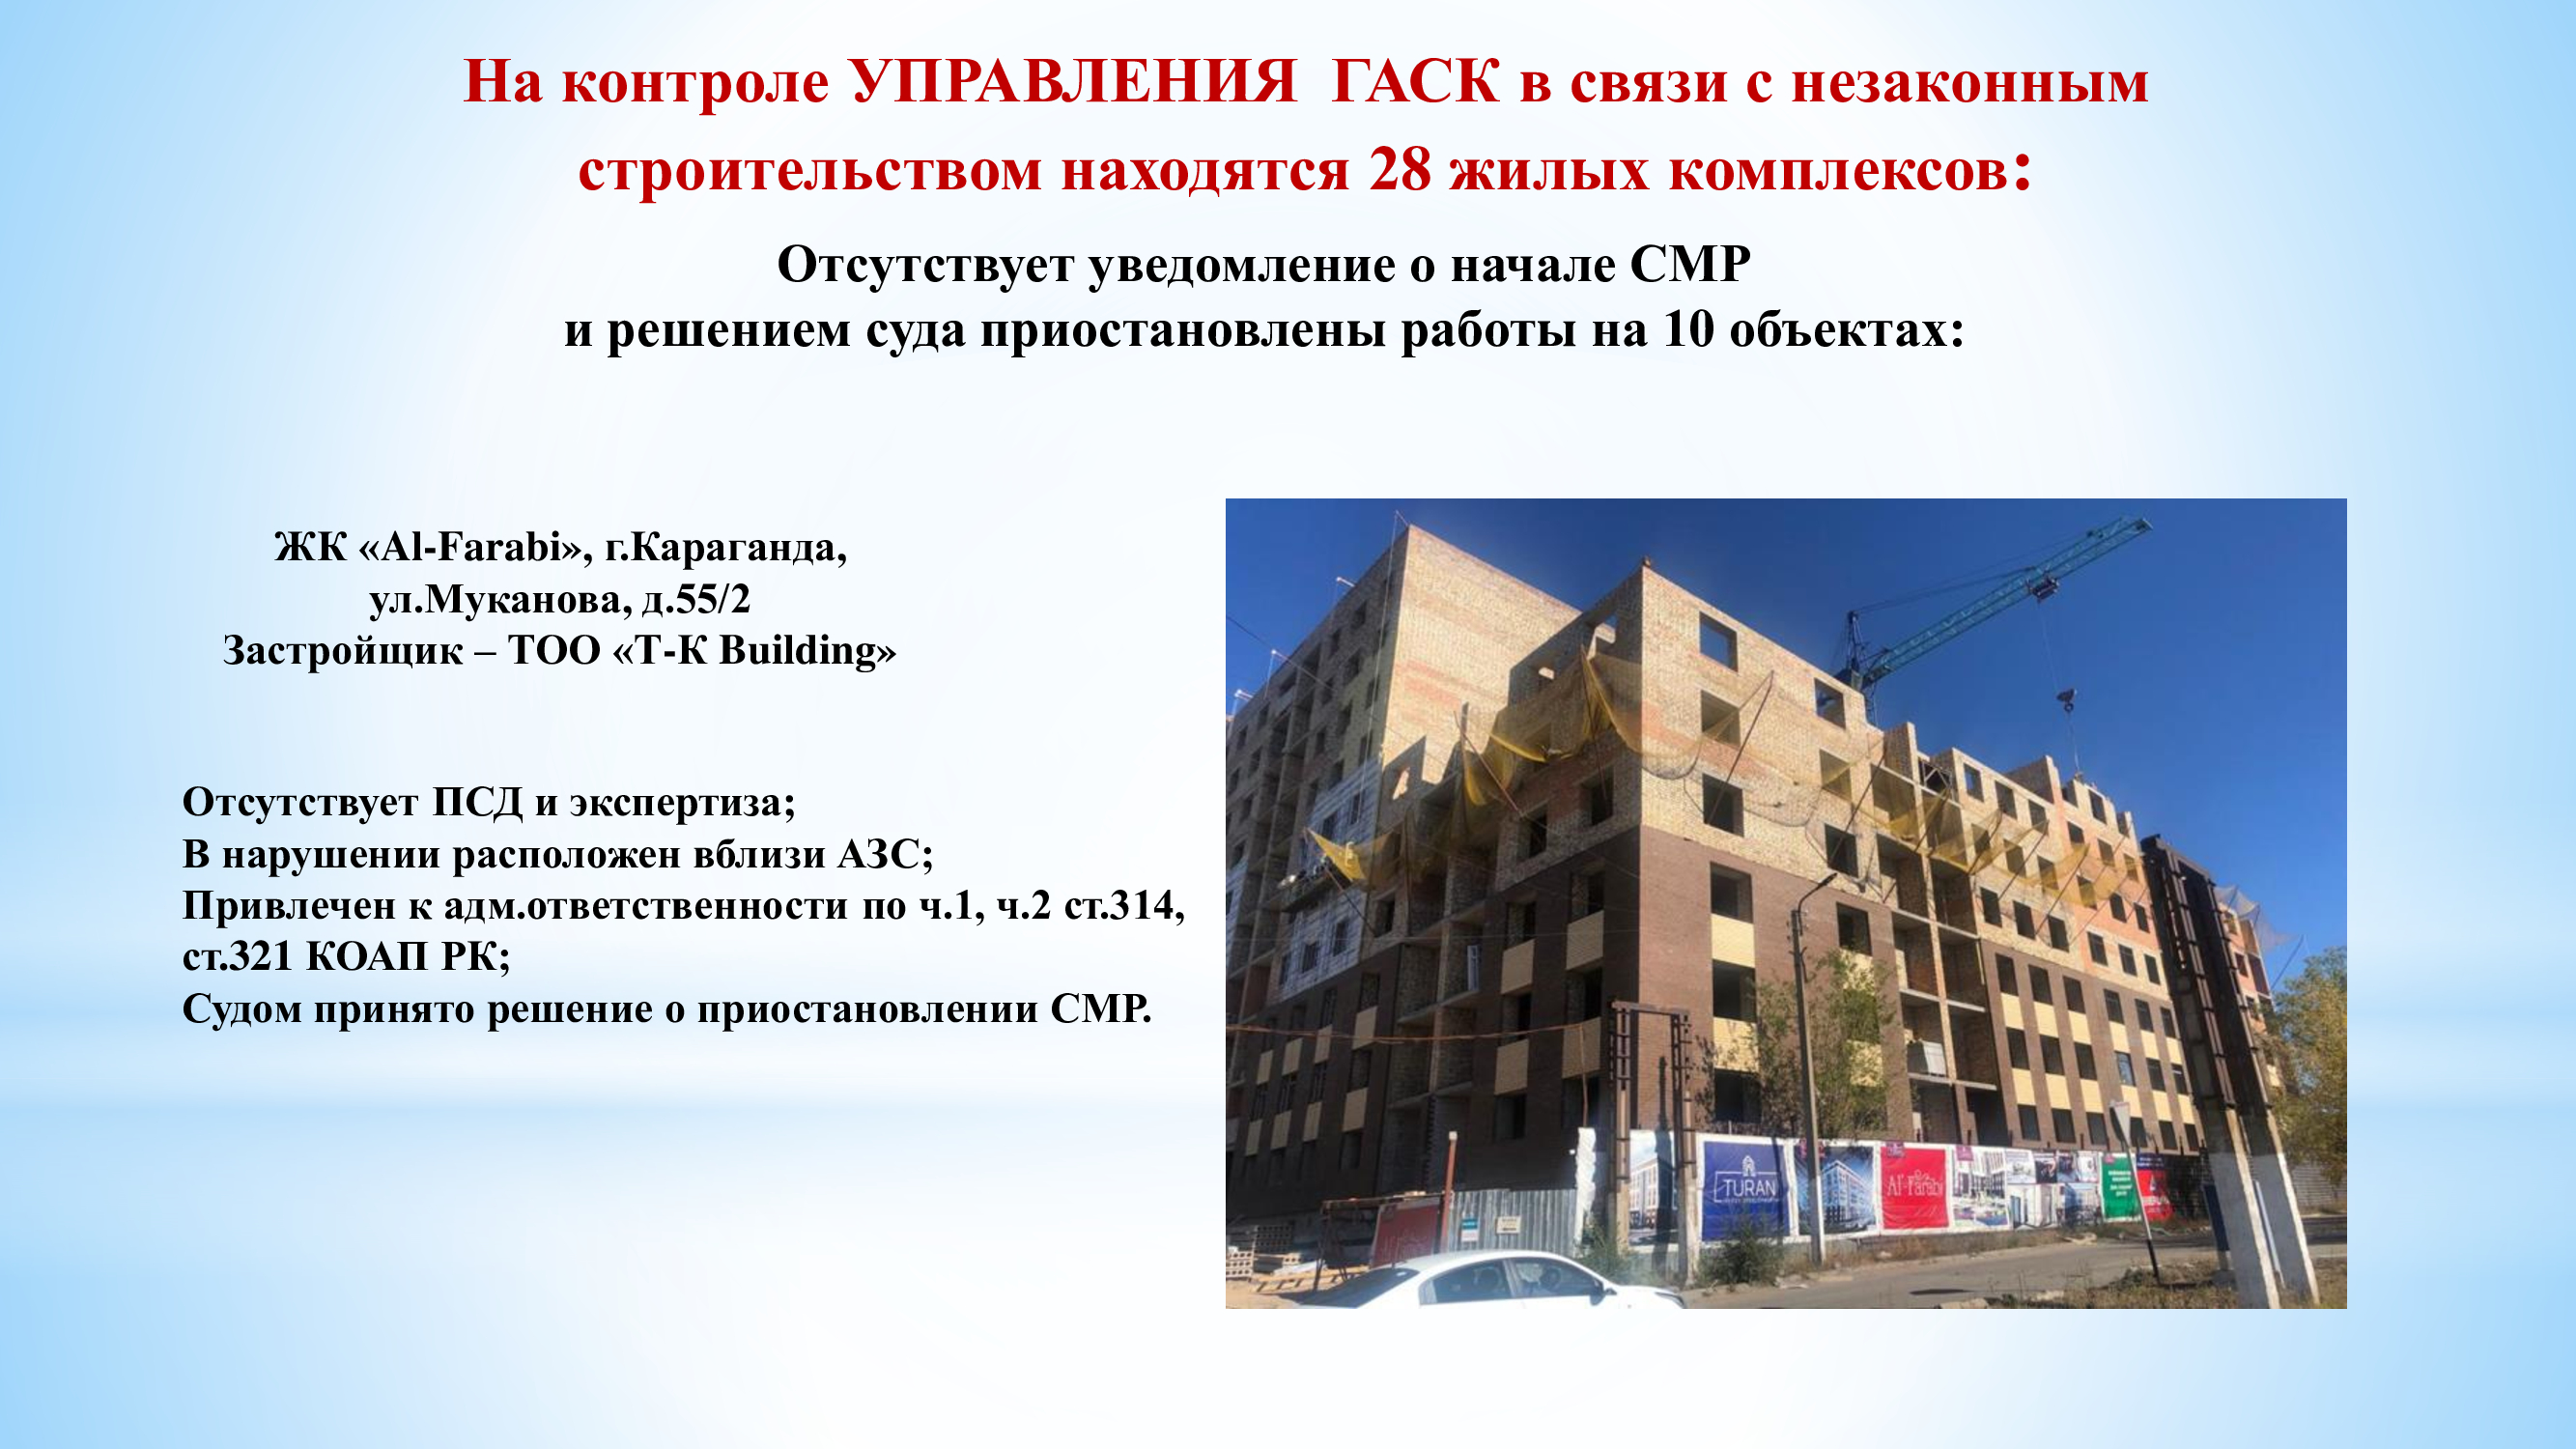 28 residential complexes are under the control of the Department of the State Architectural and Construction Committee of the Karaganda region in connection with illegal construction